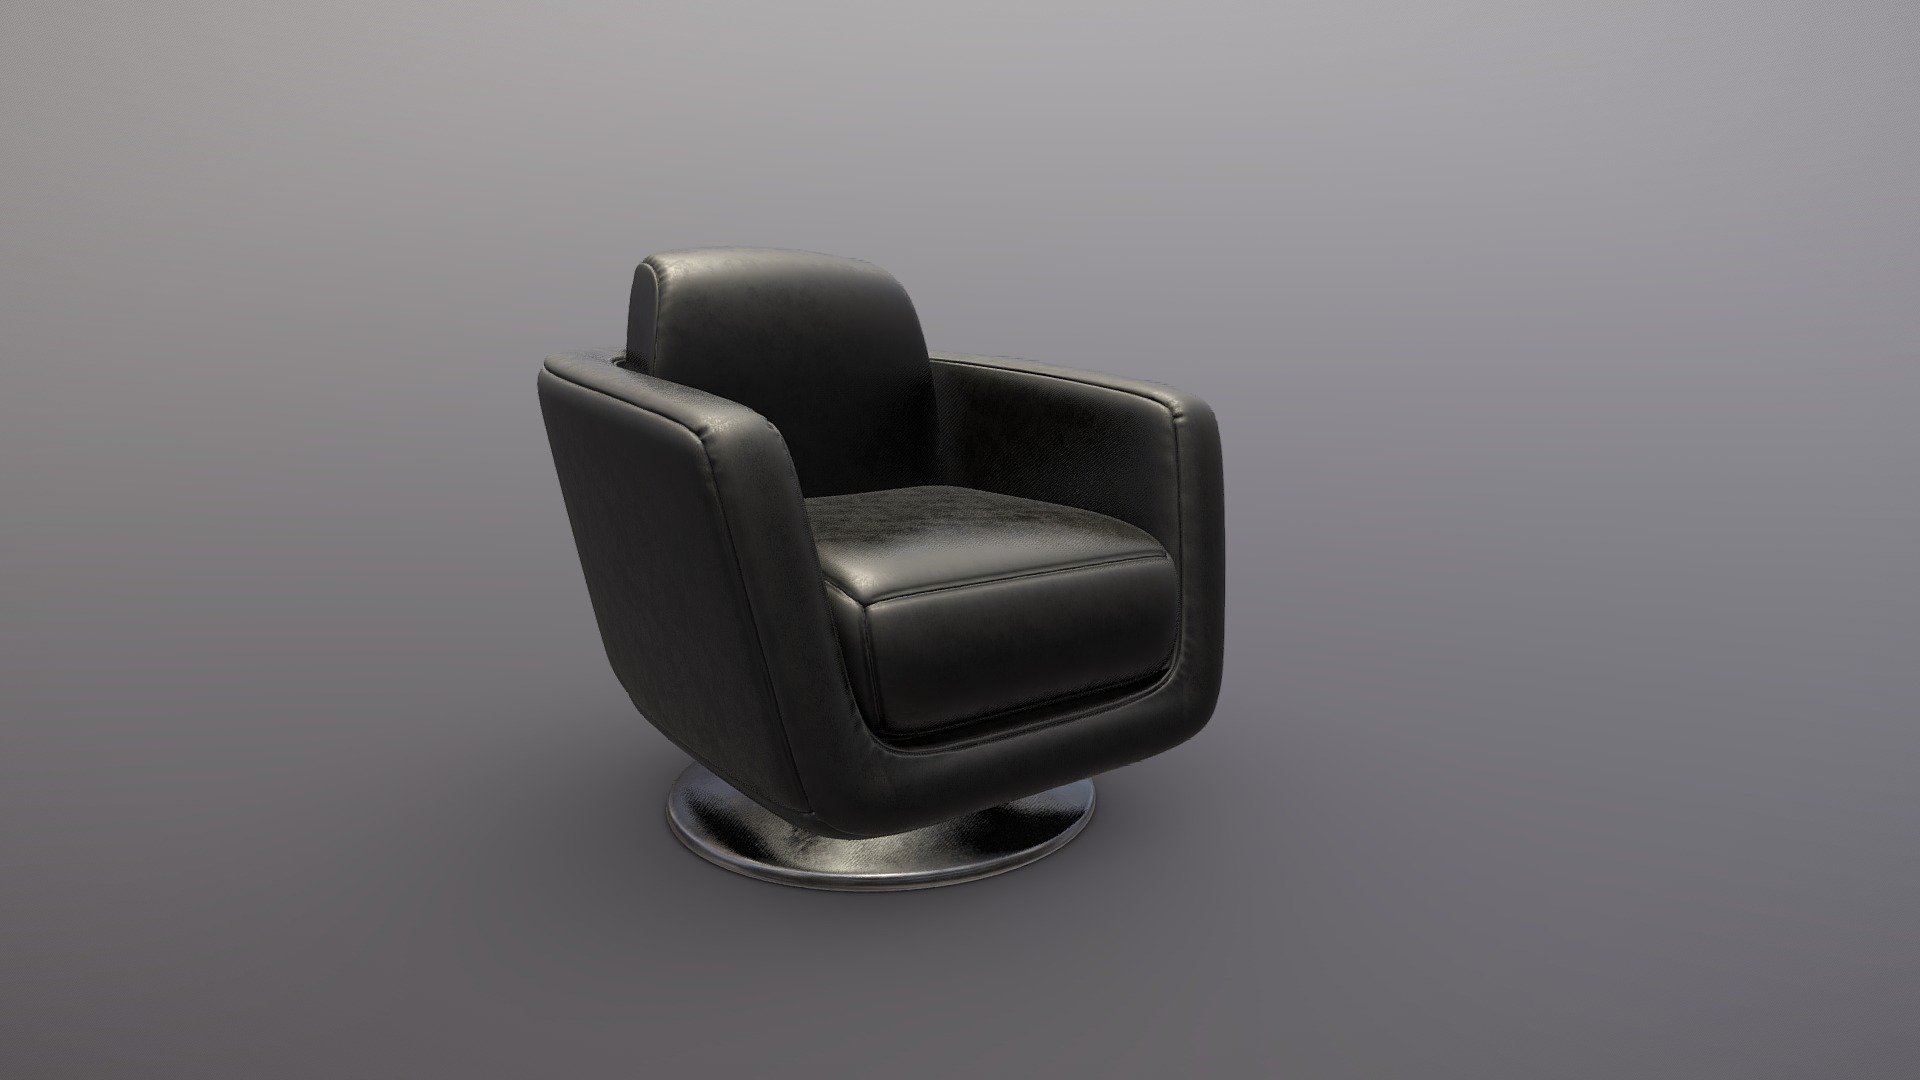 Slick Armchair
I made this armchair in Blender 3D (modeling, scuplting, retopology, unwarping) then baked and textured it in Substance Painter. 

Thanks for watching 3d model